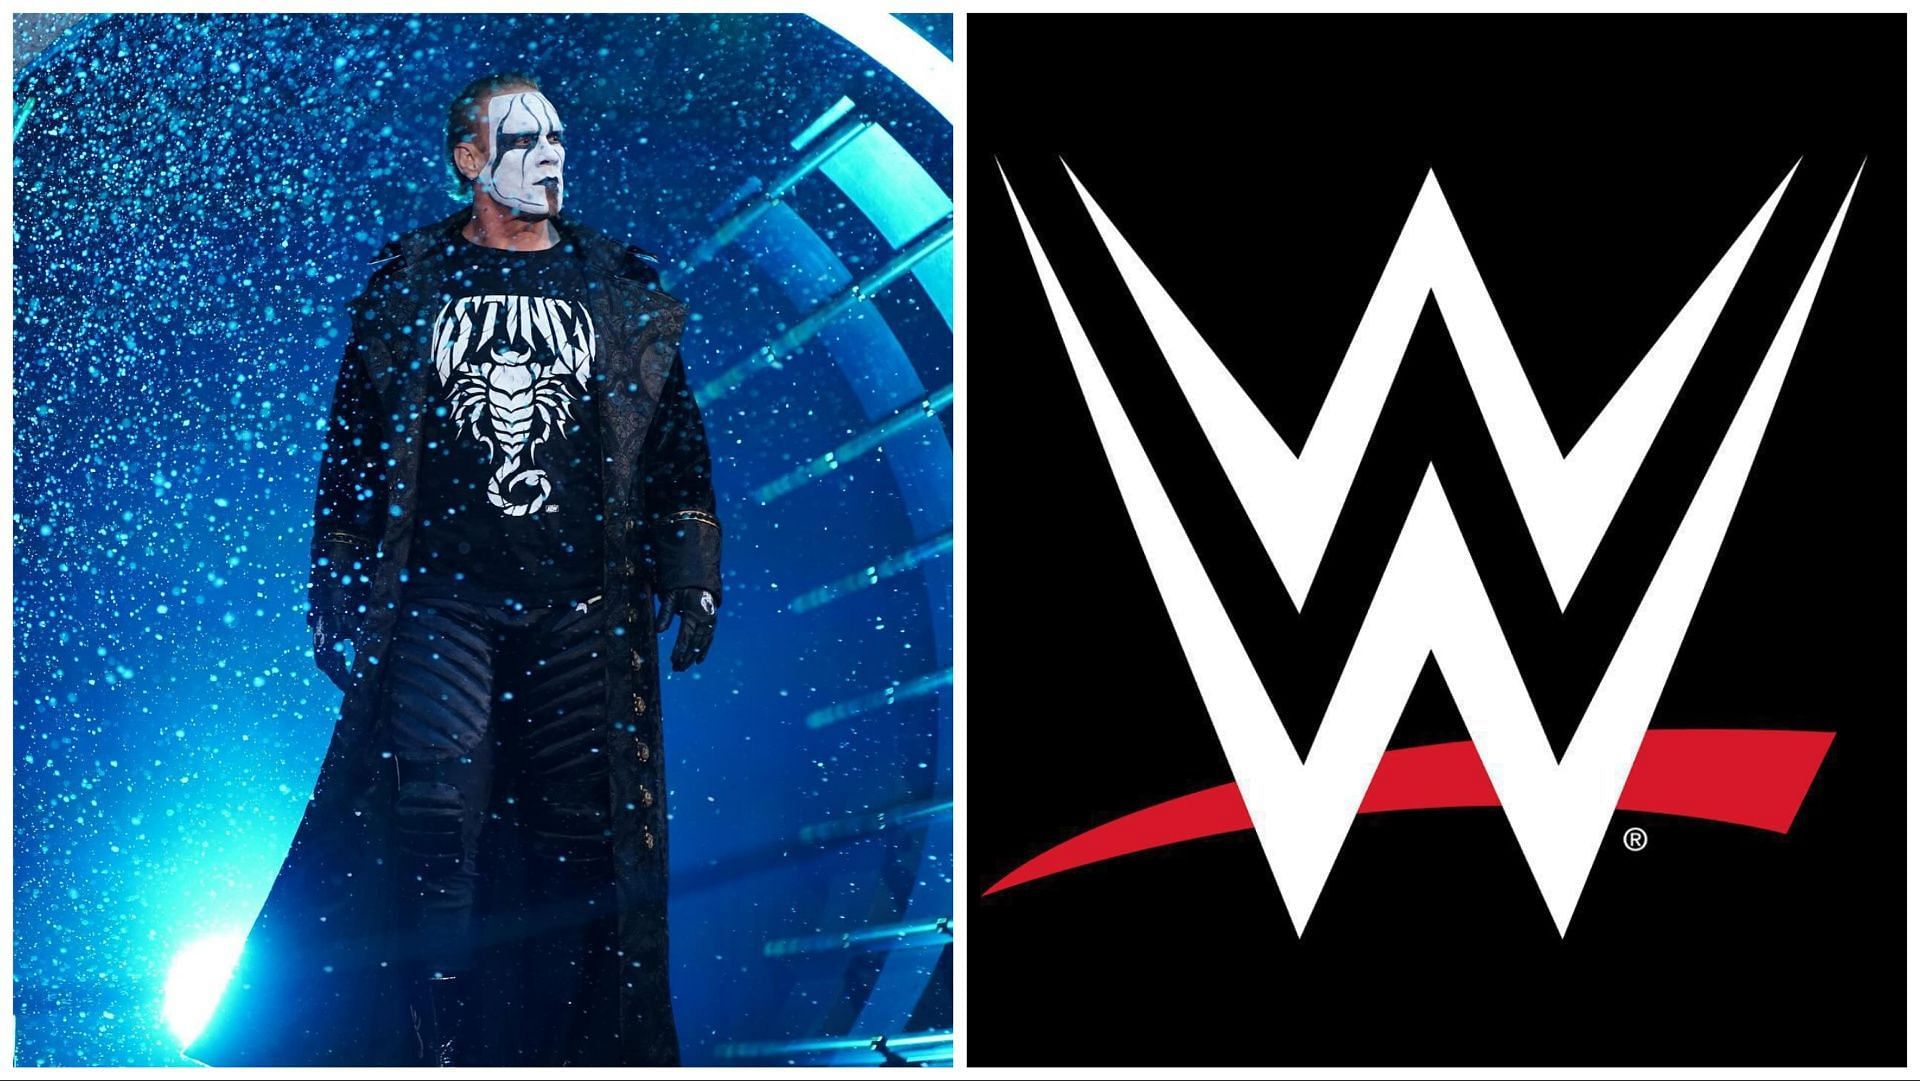 Sting makes entrance on AEW Dynamite [Left], Official WWE company logo [Right]